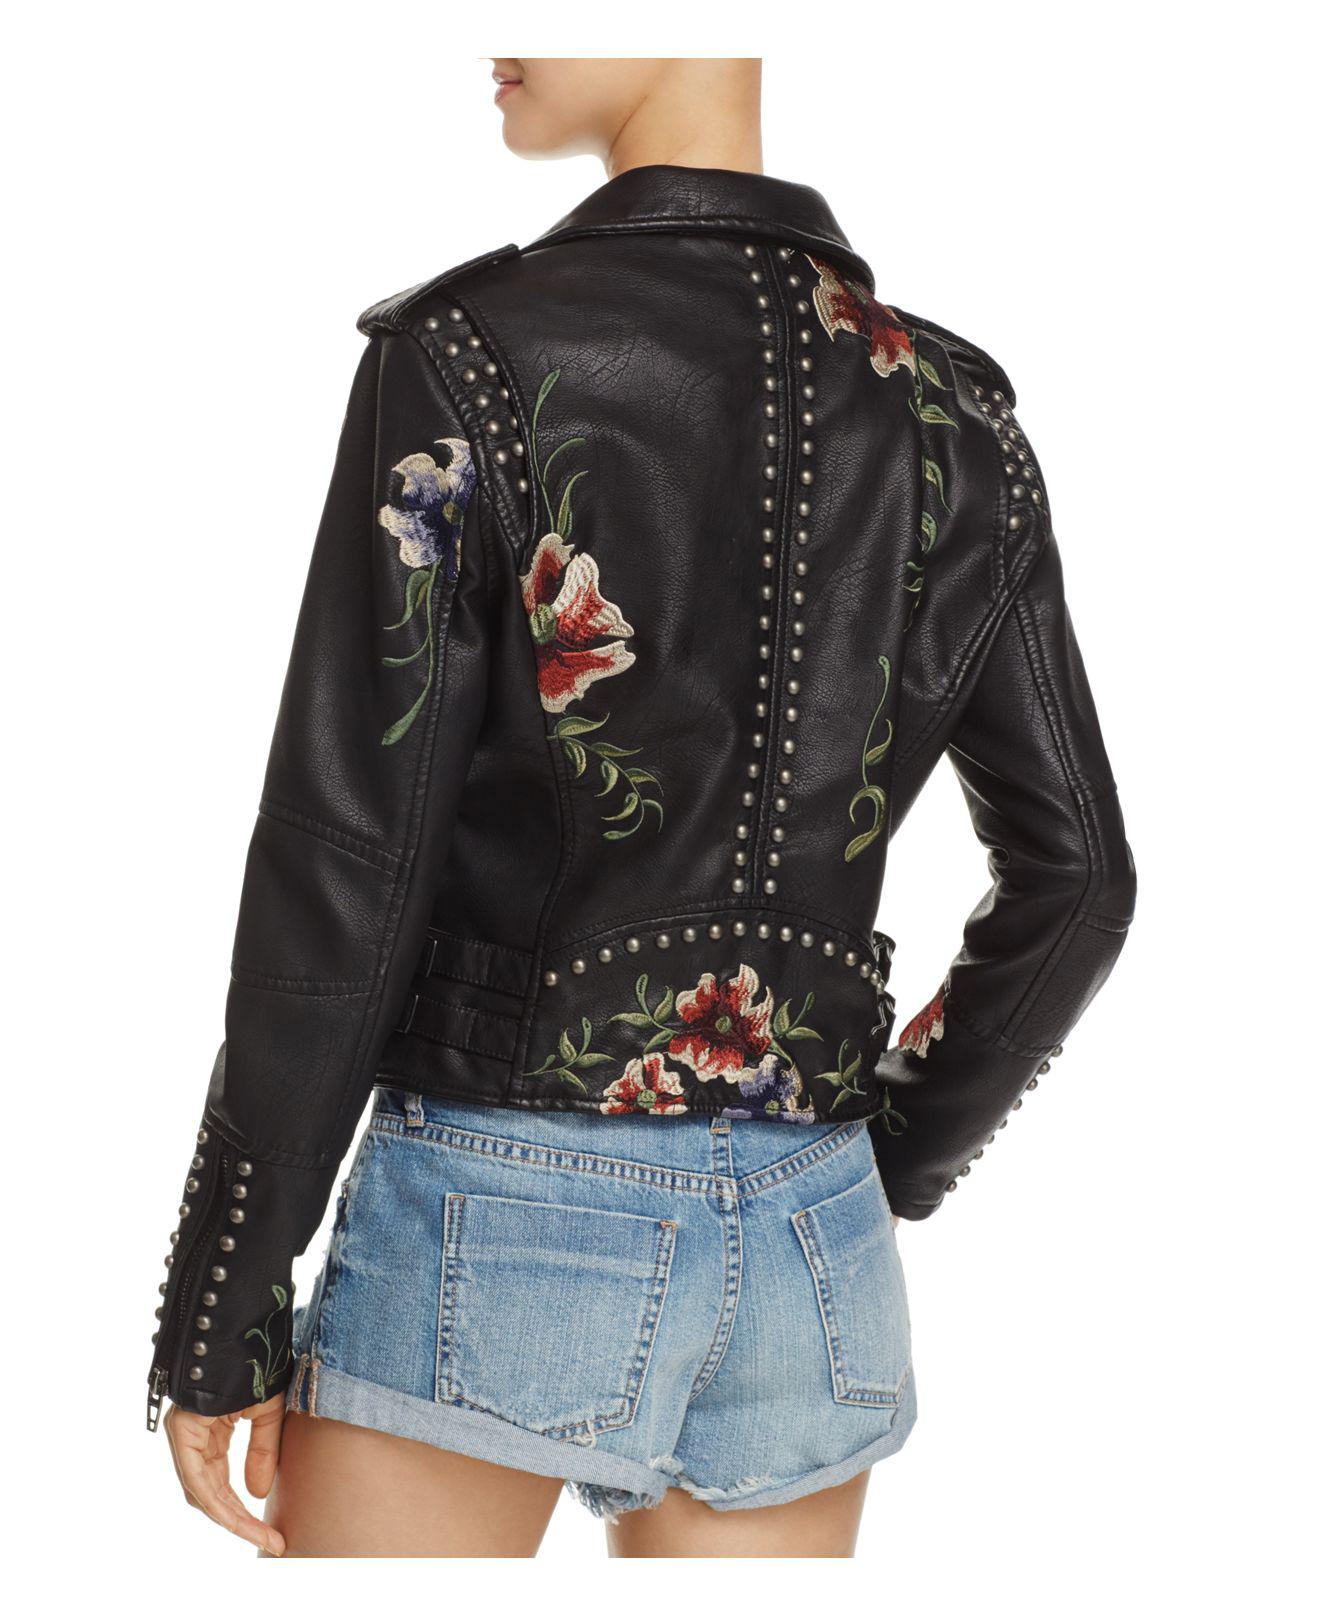 As You Wish BLANKNYC X-Small Womens Black Vegan Leather Floral Embroidered Jacket 